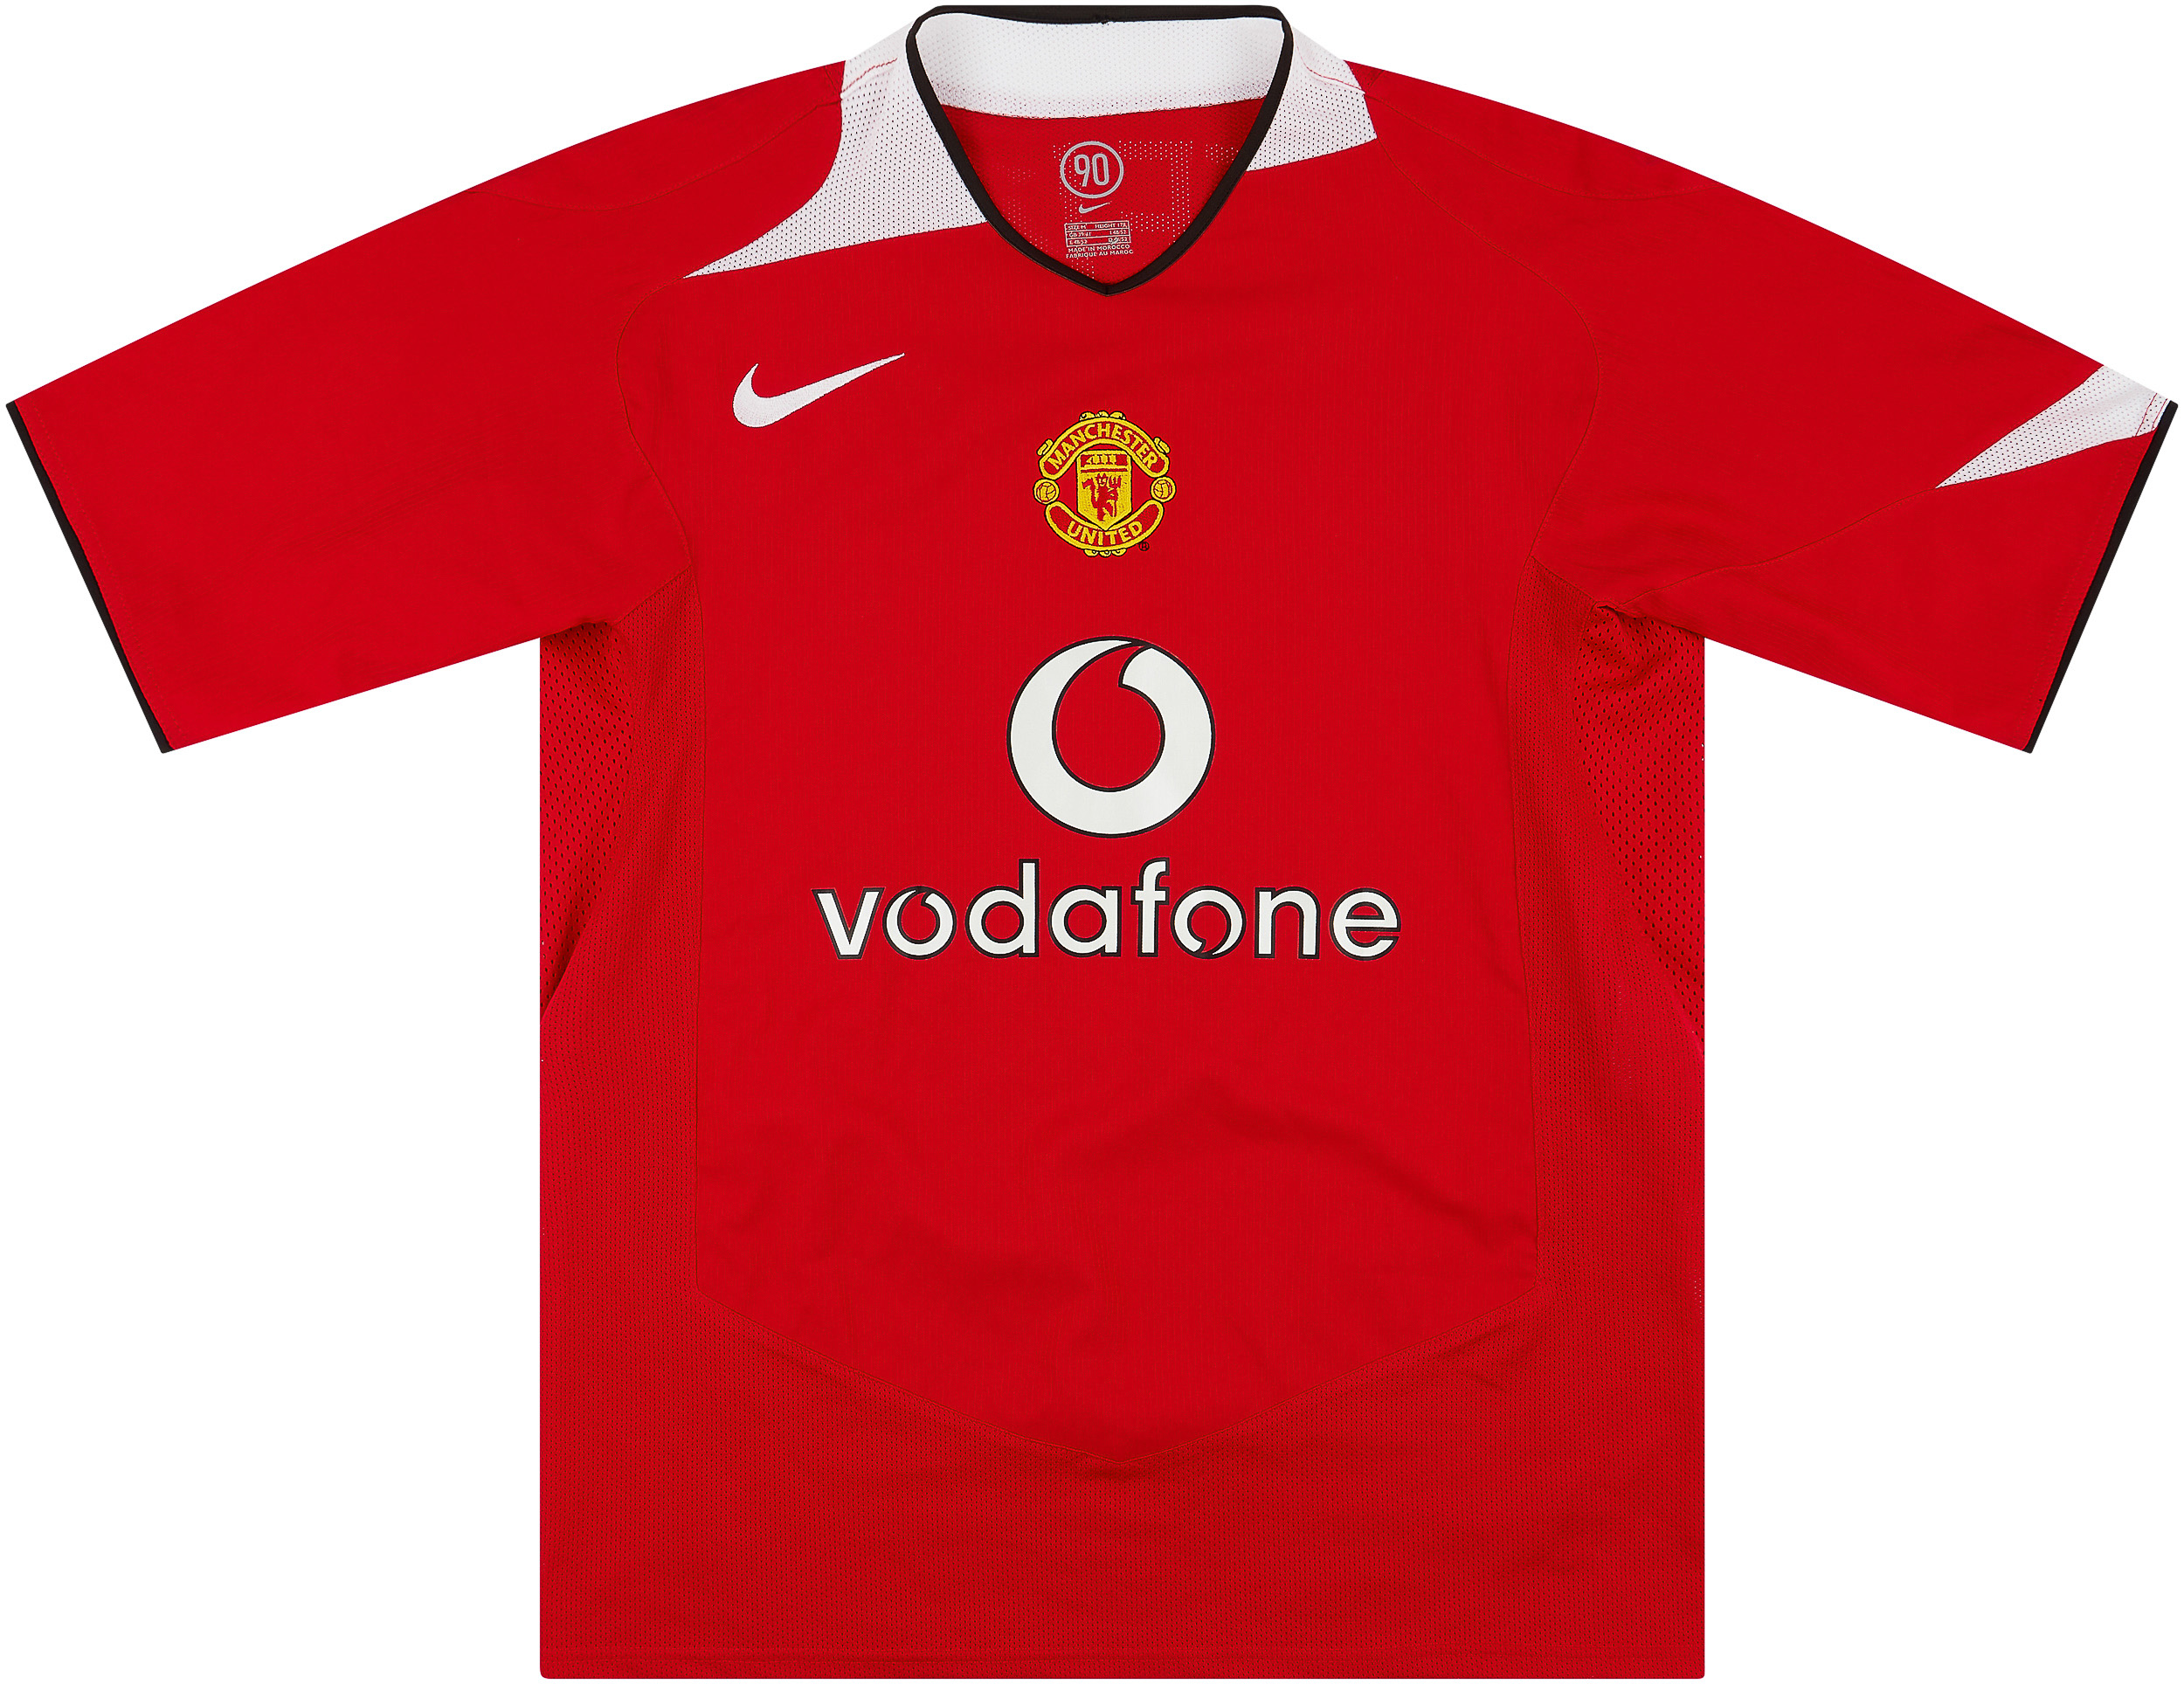 2004-06 Manchester United Home Shirt - 8/10 - ()